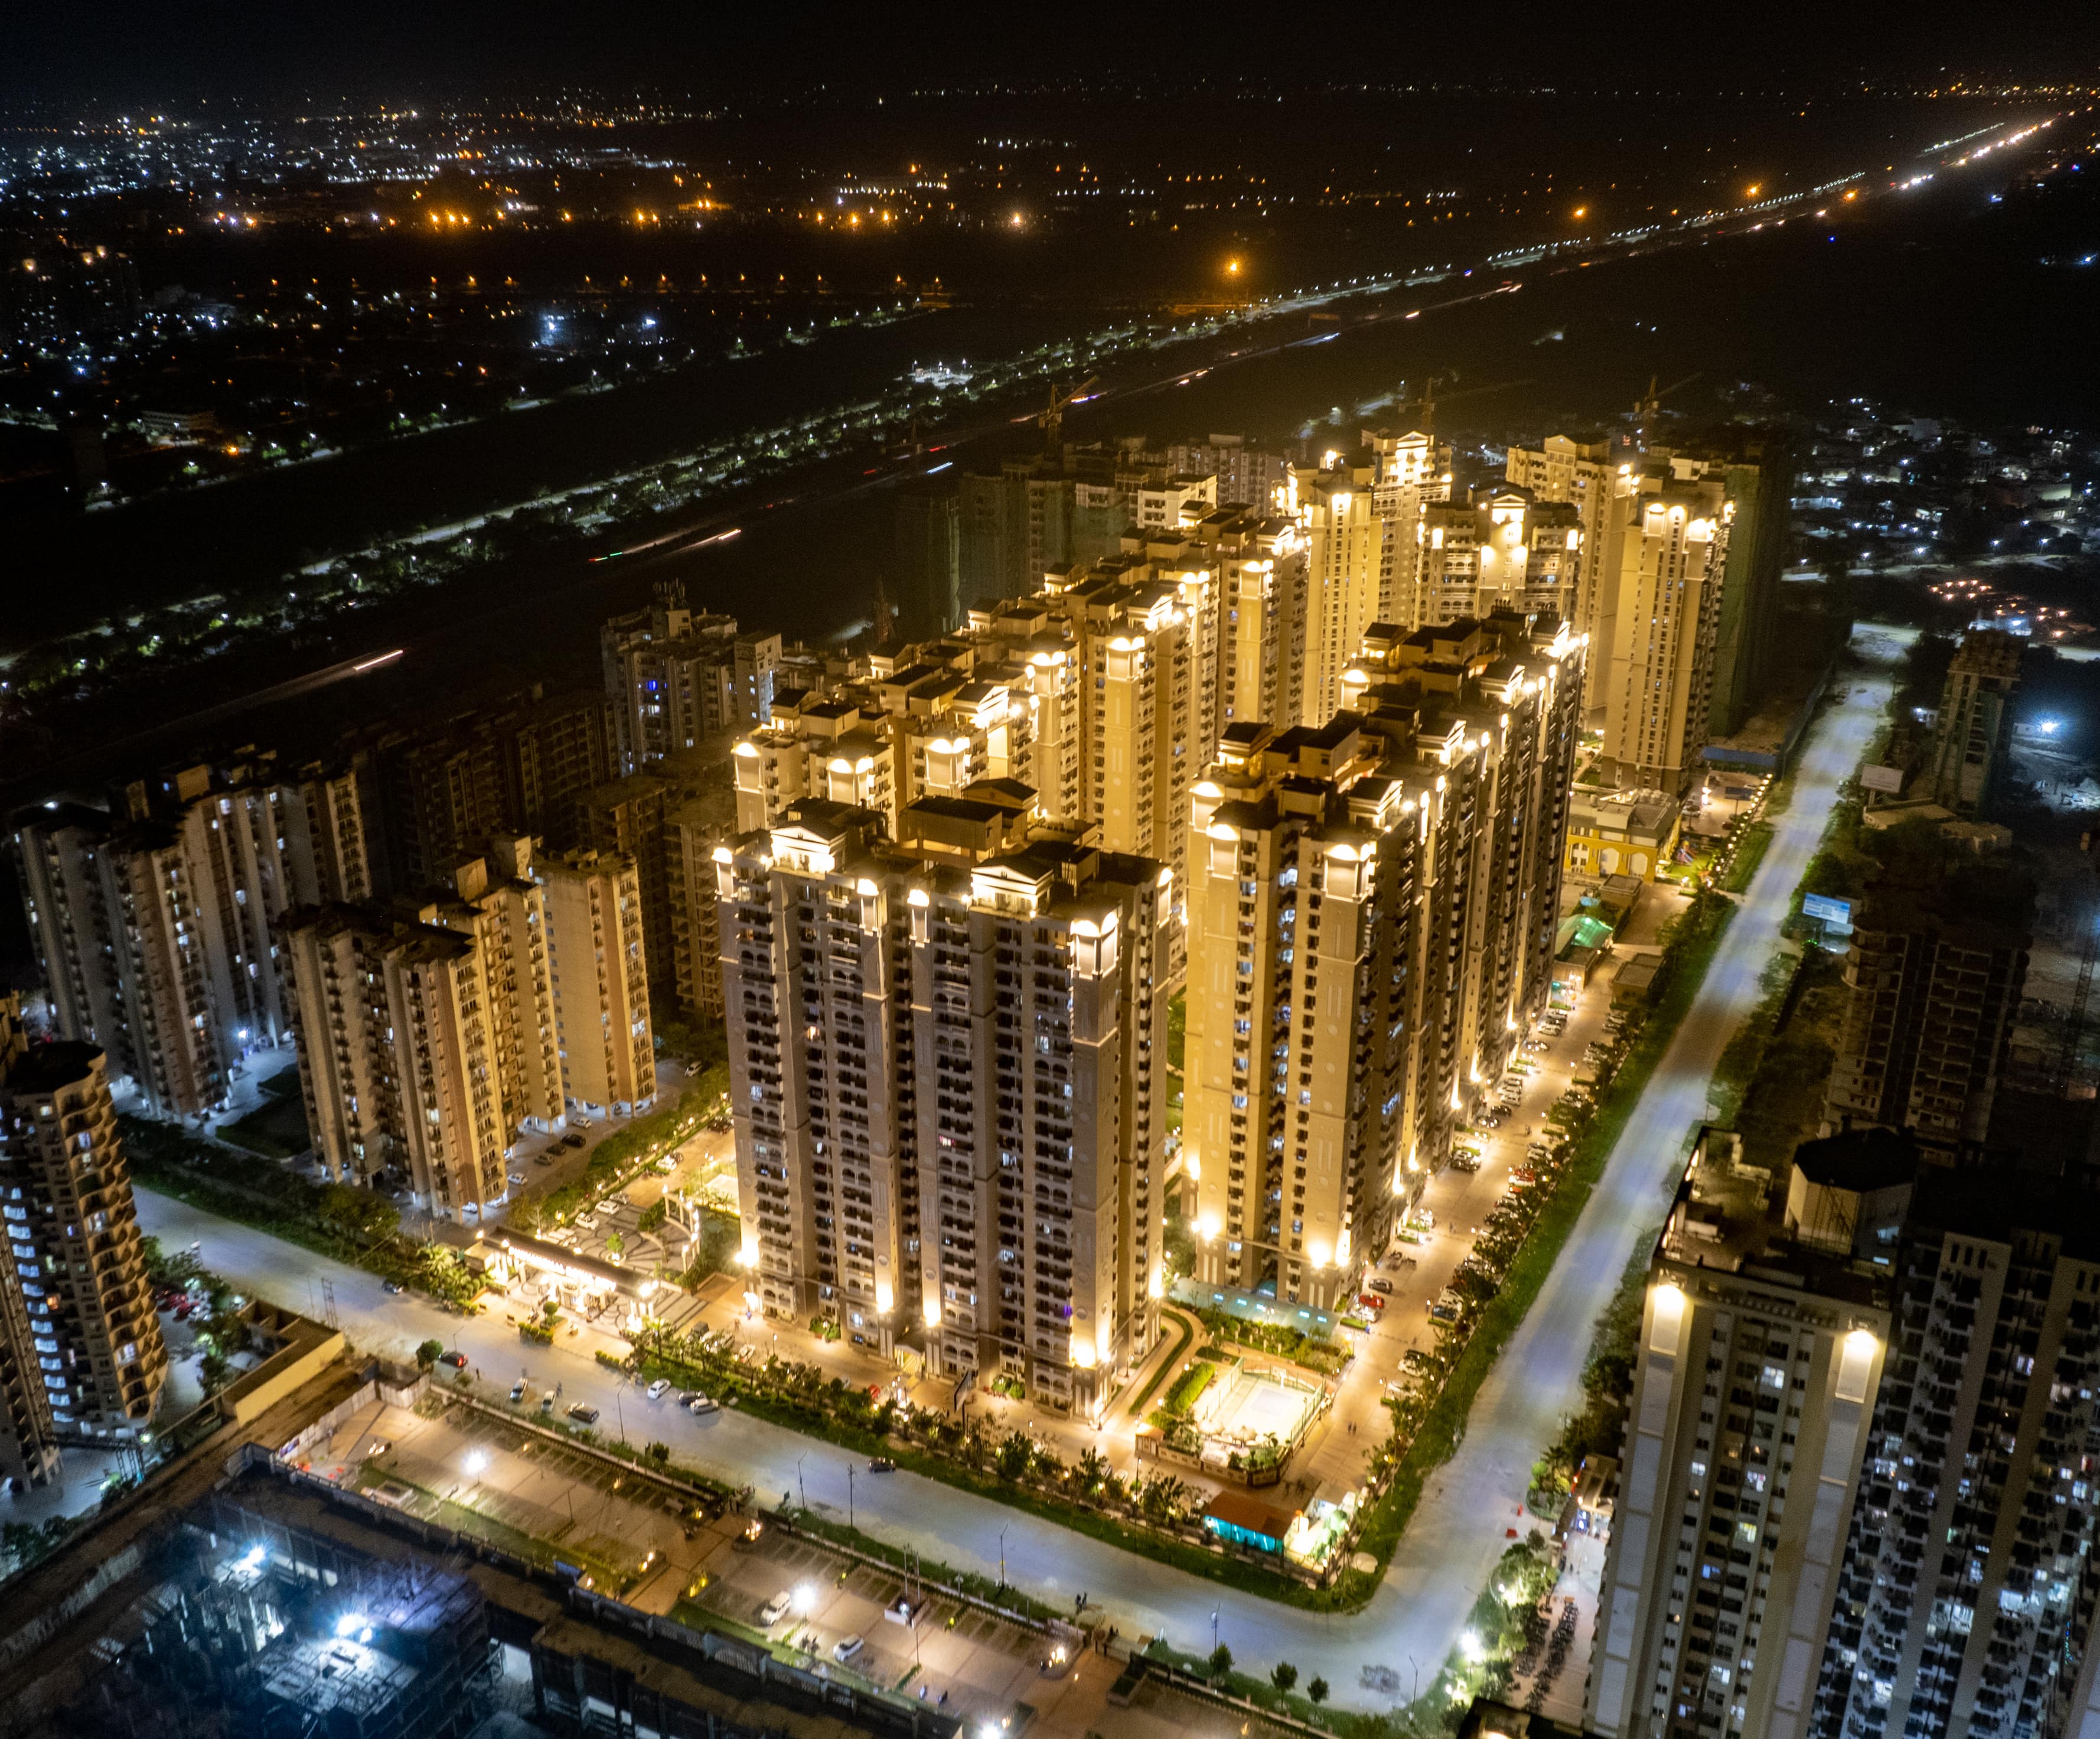 Looking to Buy a Property In Greater Noida? Buy it Now or Pay Thousands More Later